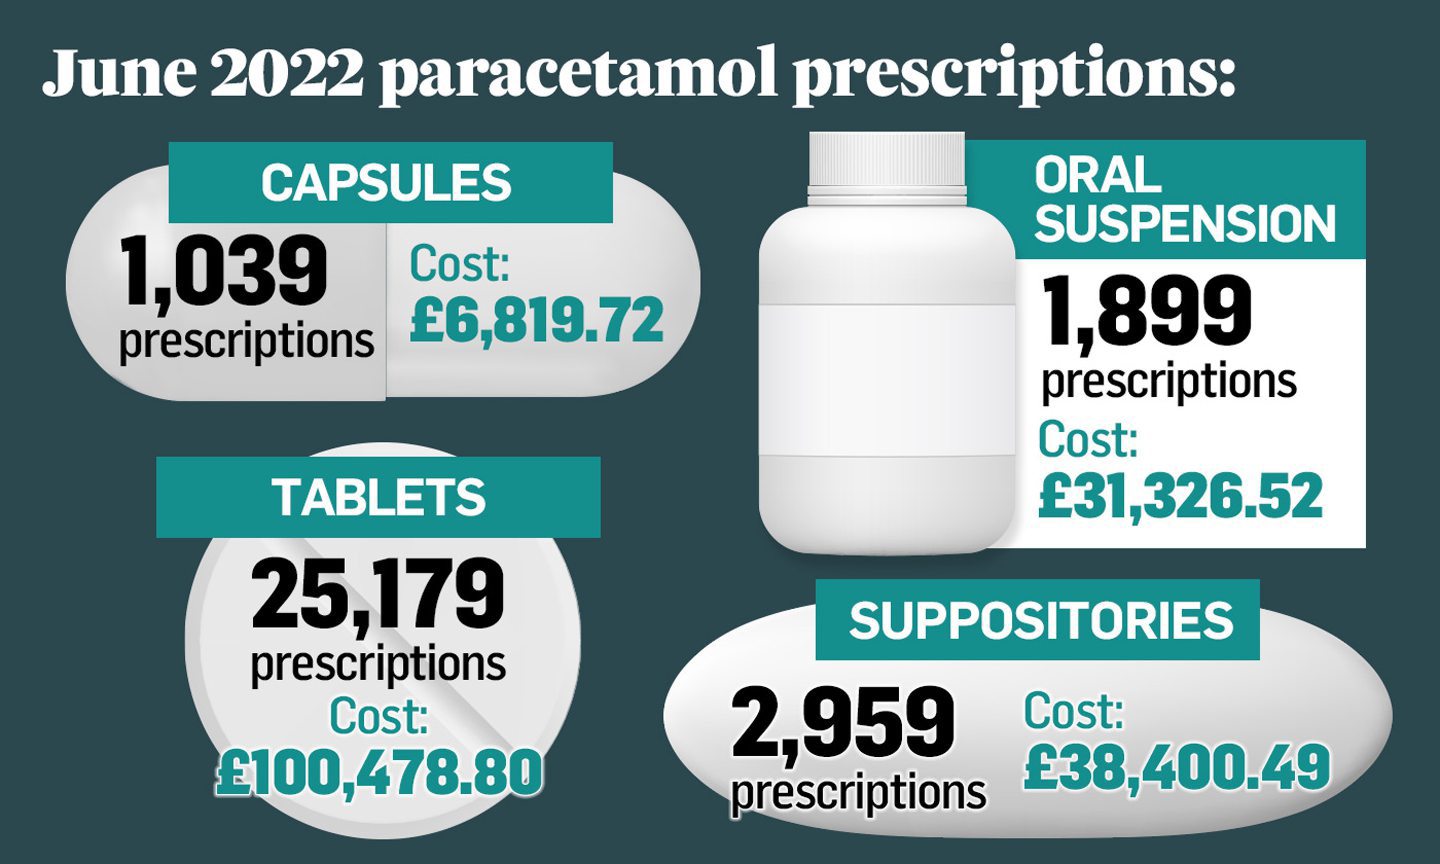 Infographic showing the number and cost of various types of paracetamol prescriptions